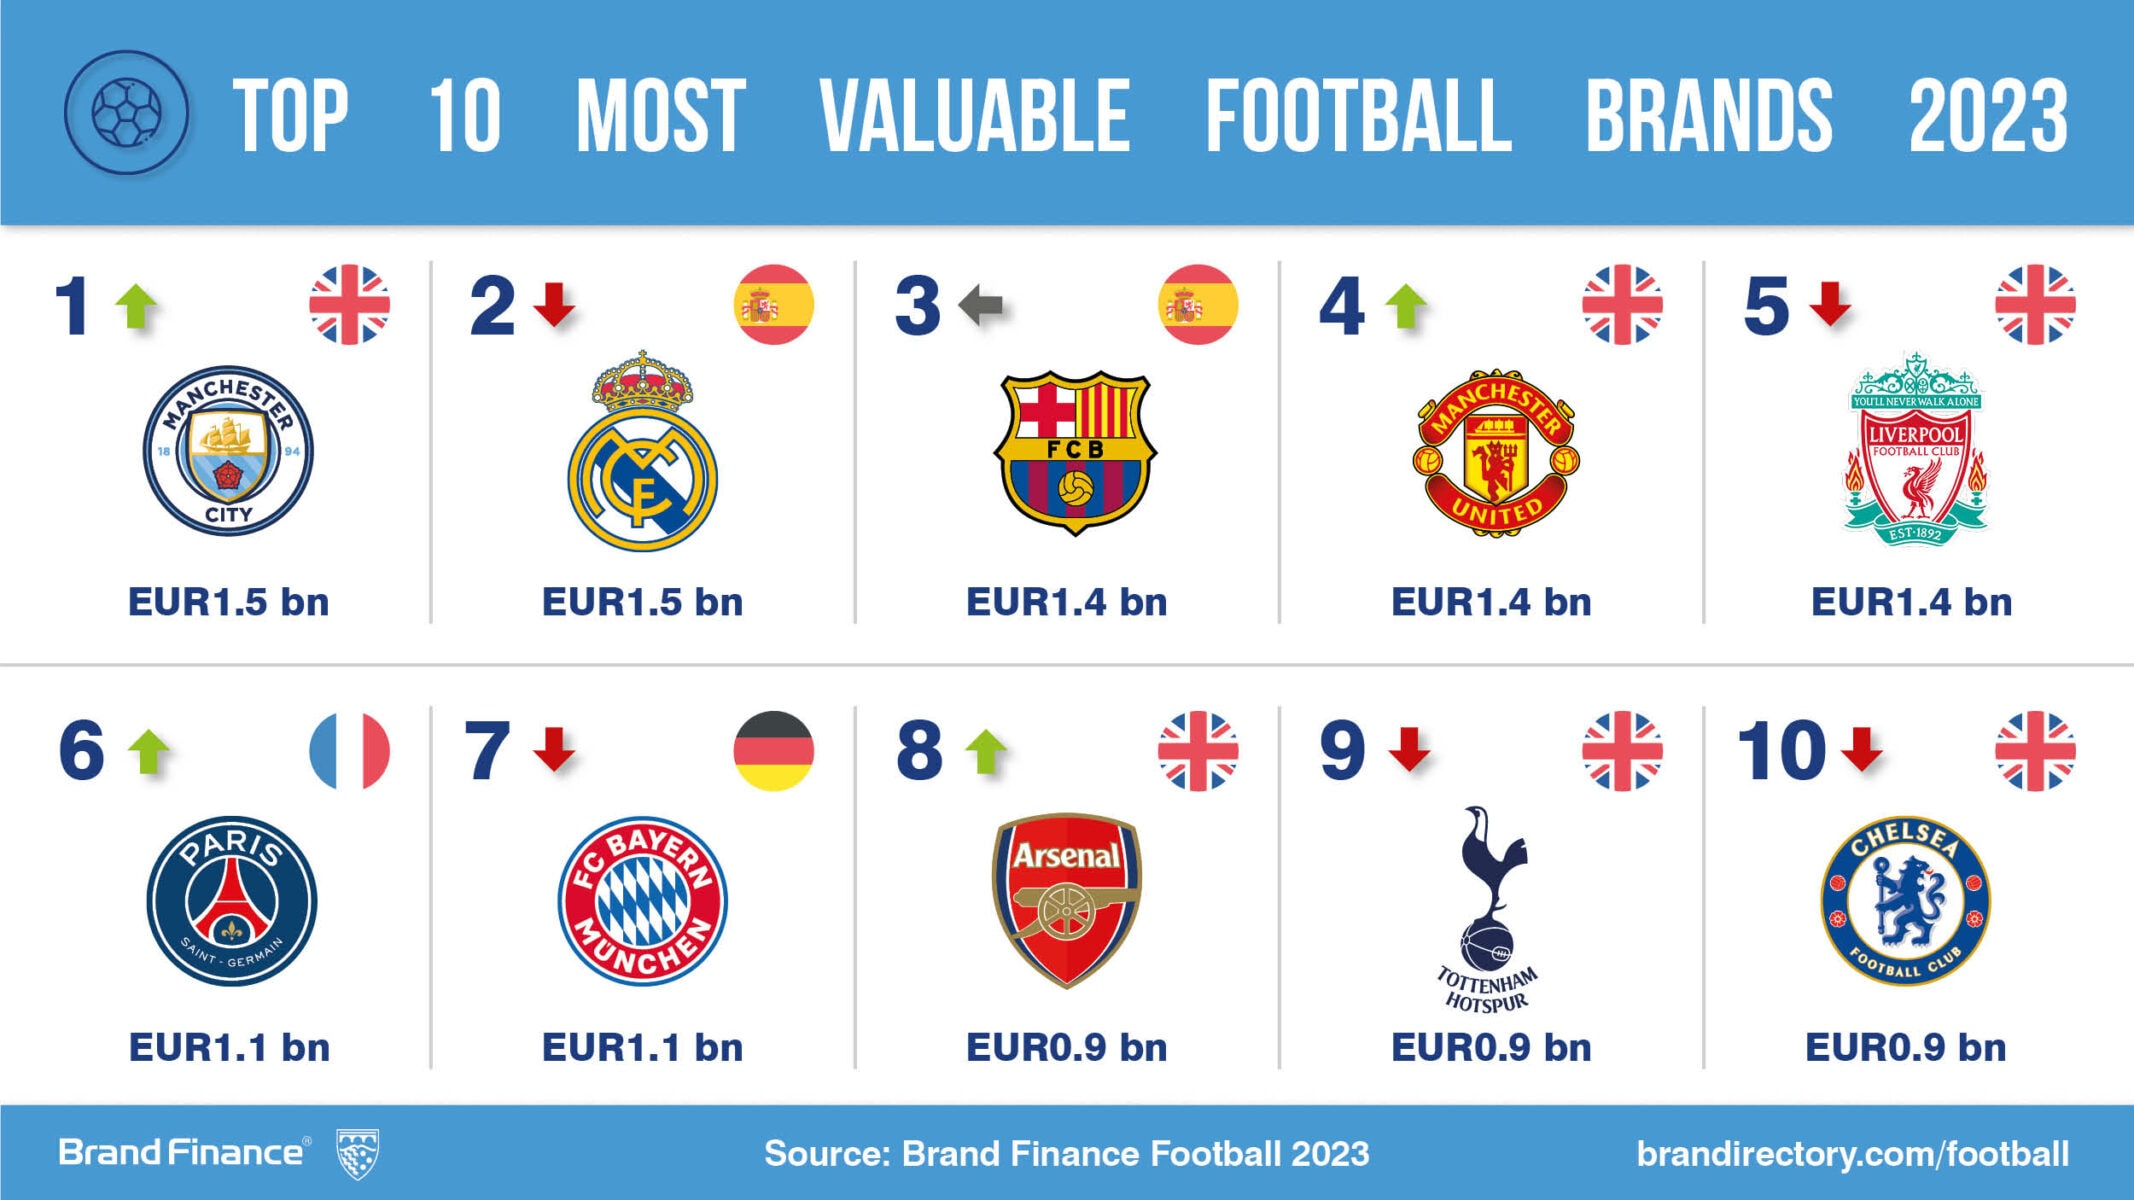 Manchester City, Most Valuable Football Club Brand in the World